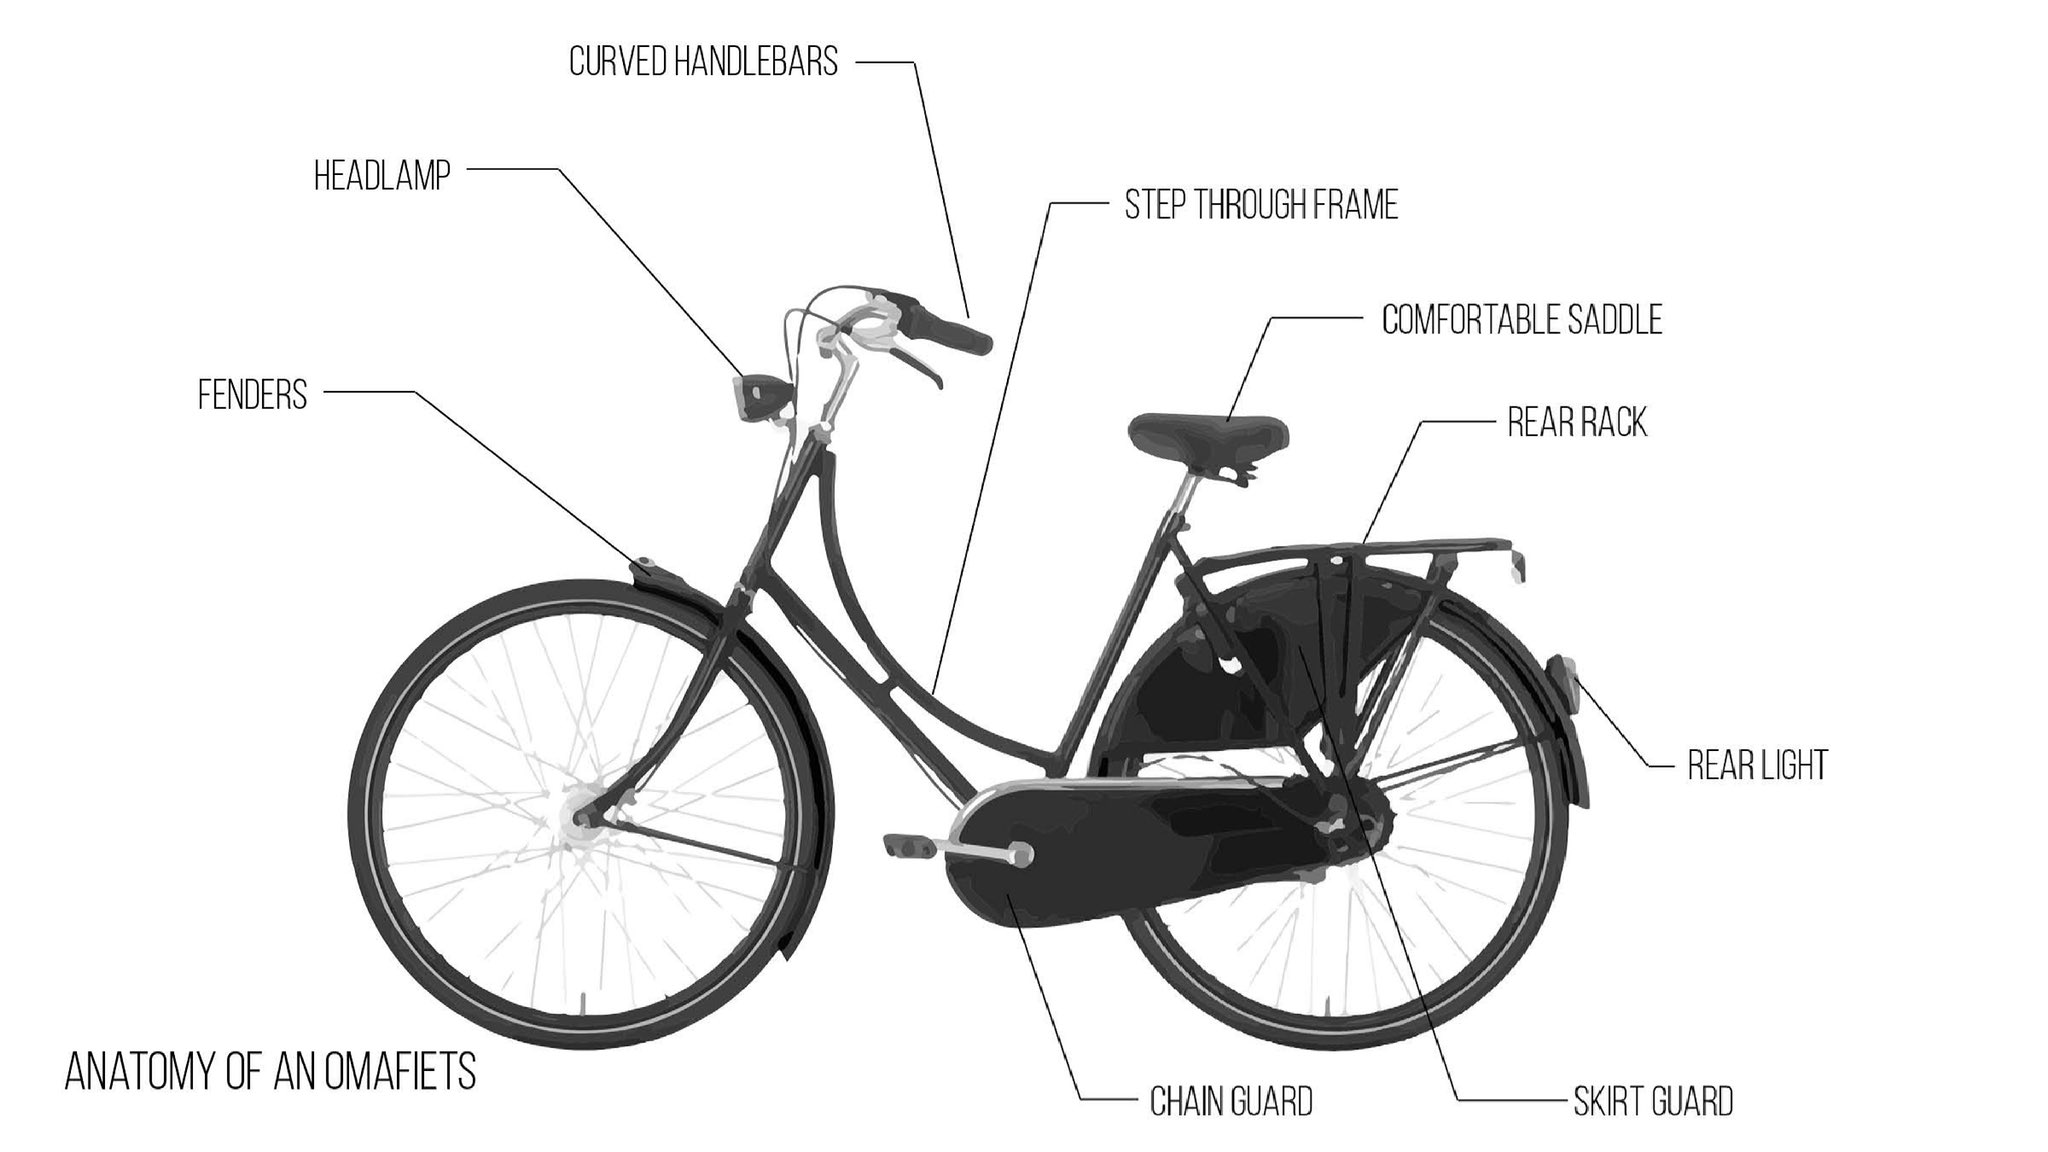 schokkend gelijktijdig Auto Erin Riediger on Twitter: "What makes a Dutch bike the perfect tool for  everyday transportation? Omafietsen come complete with all the parts needed  to transport you &amp; what you are carrying without